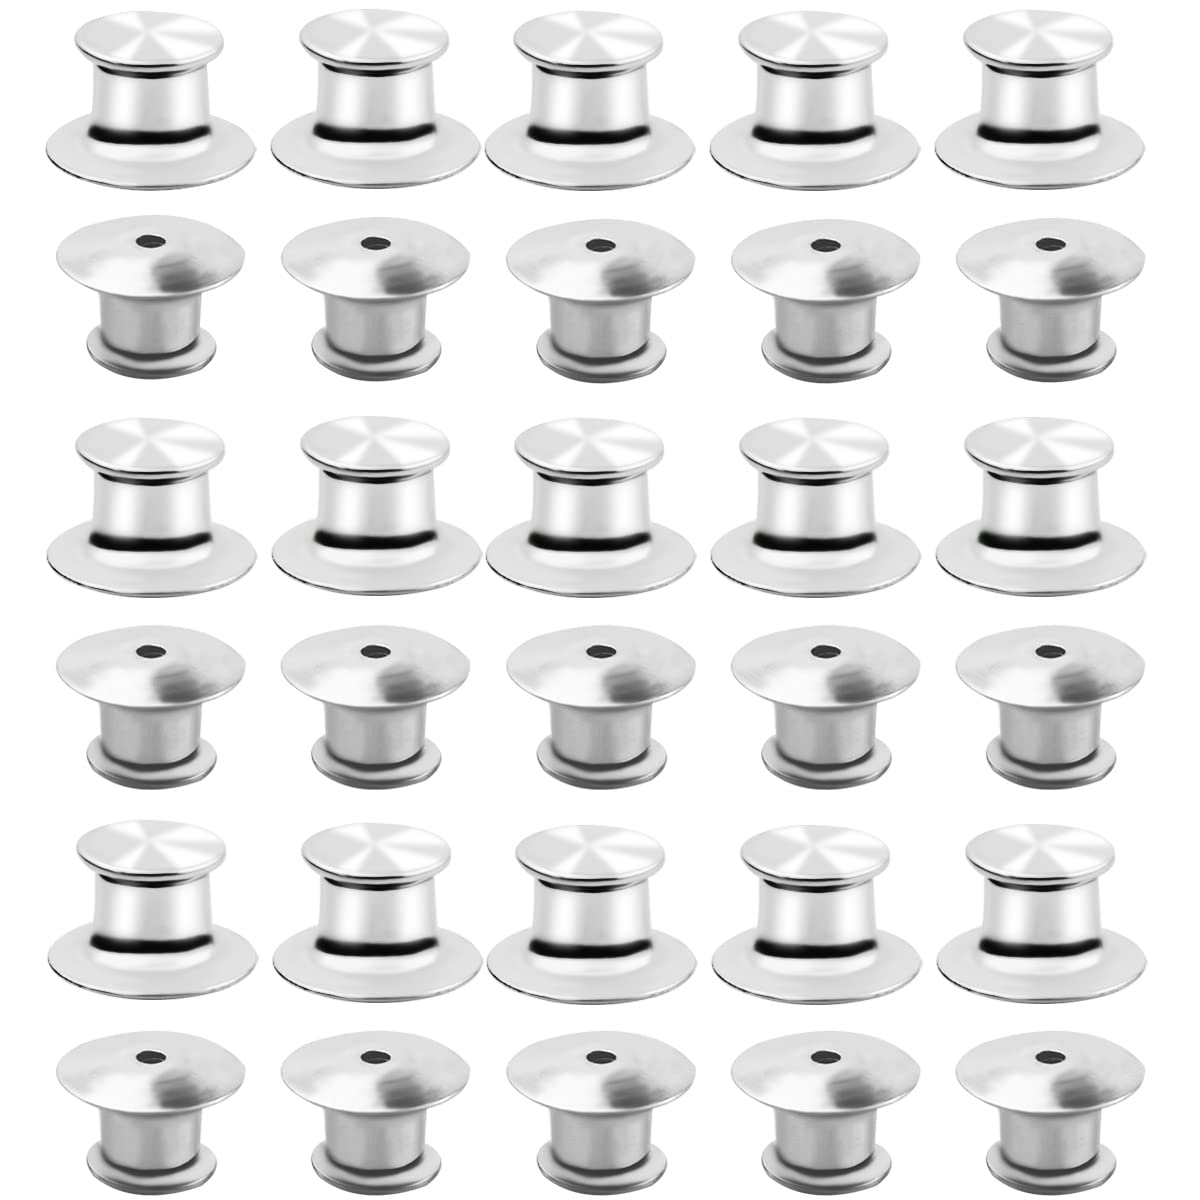  LQ Industrial 12PCS Metal Locking Pin Backs Clasp Bulk Pin  Keepers for Name Tags Displaying Books Disney Pins Golden and Silver